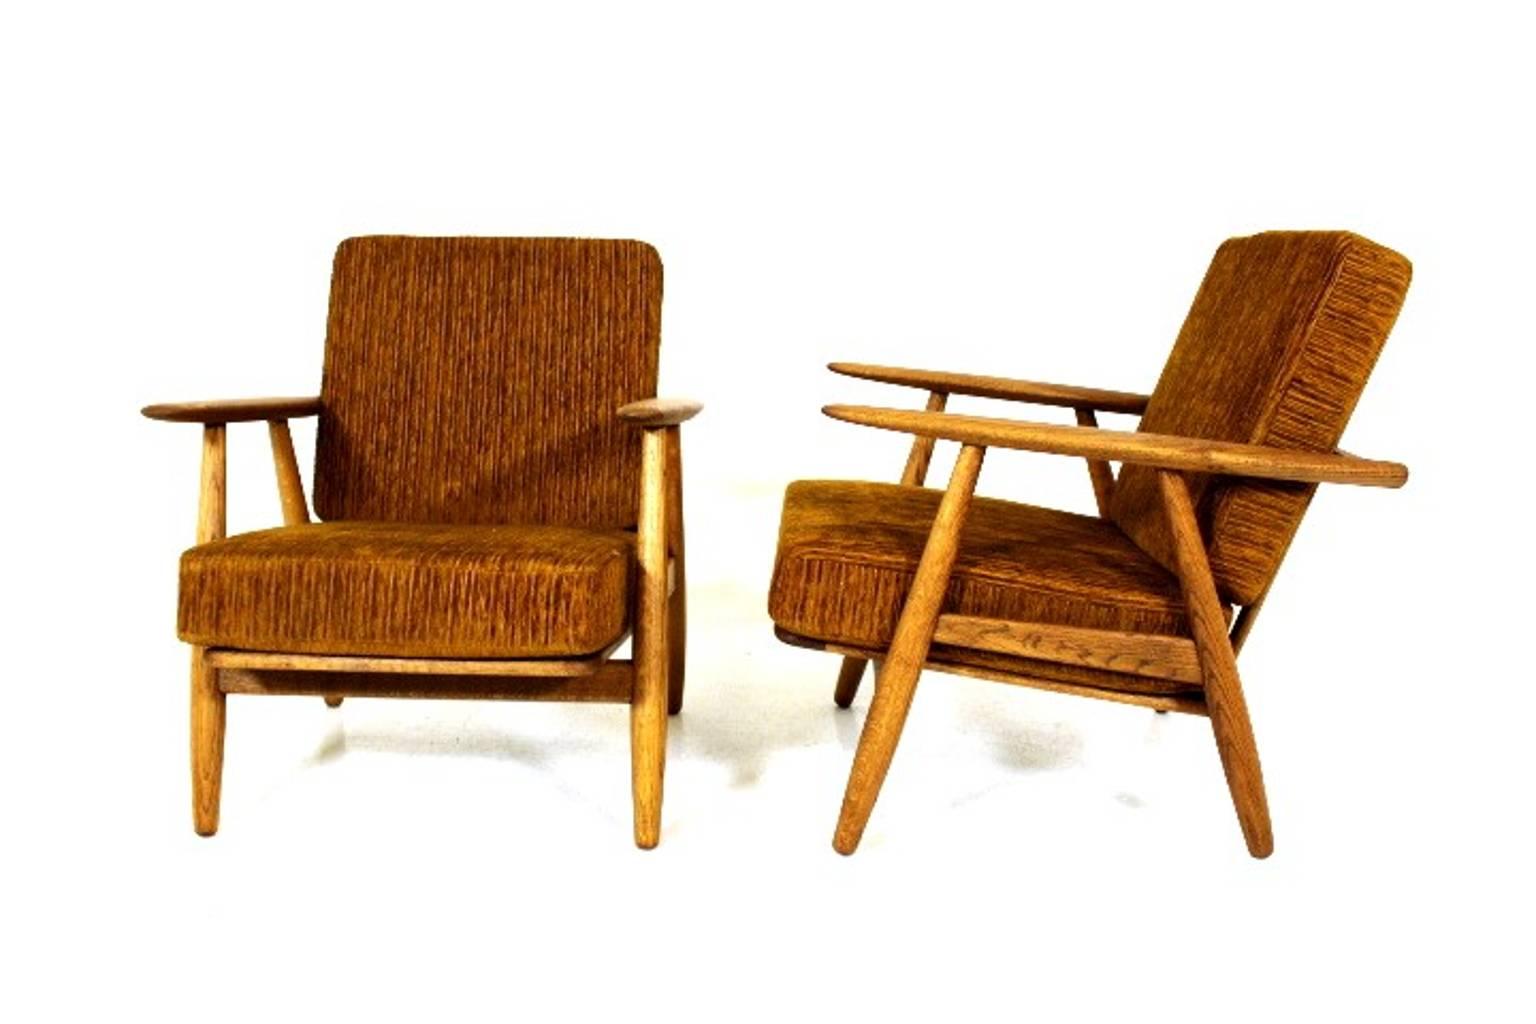 A pair of Hans J Wegner cigar lounge chairs model GE 240 in oak and fabric.
         